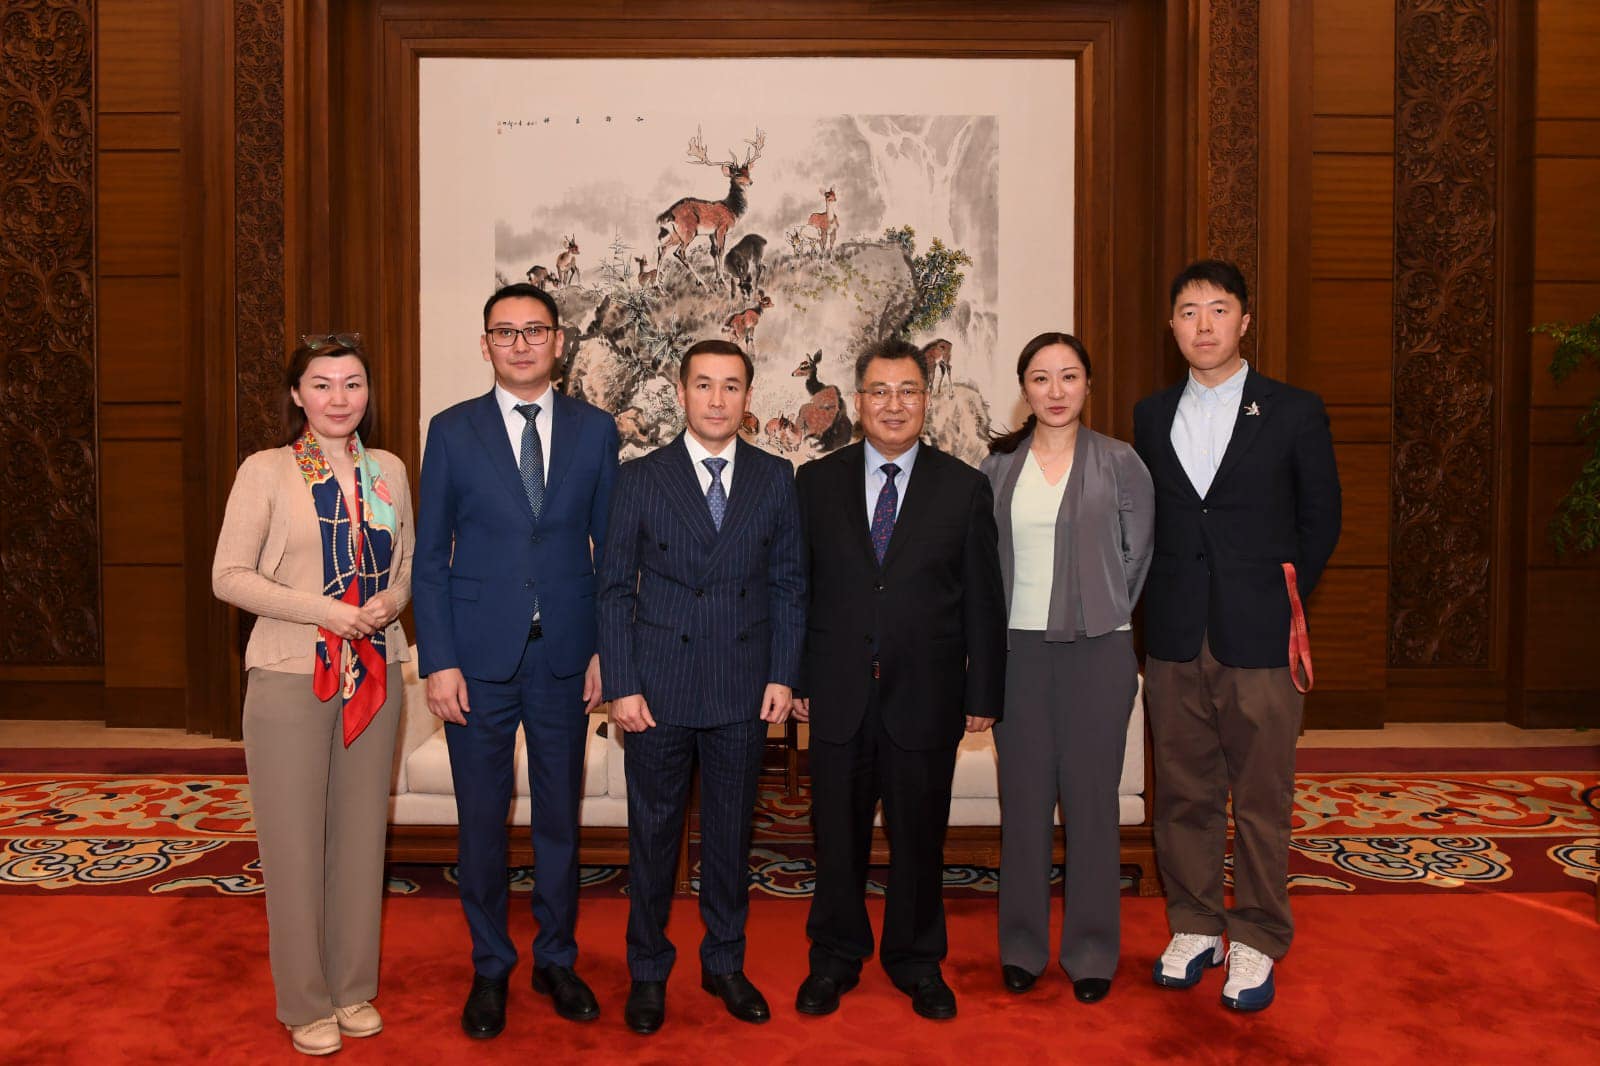 The Acting Director of the National Museum of the Republic of Kazakhstan met with the Director of the National Museum of China